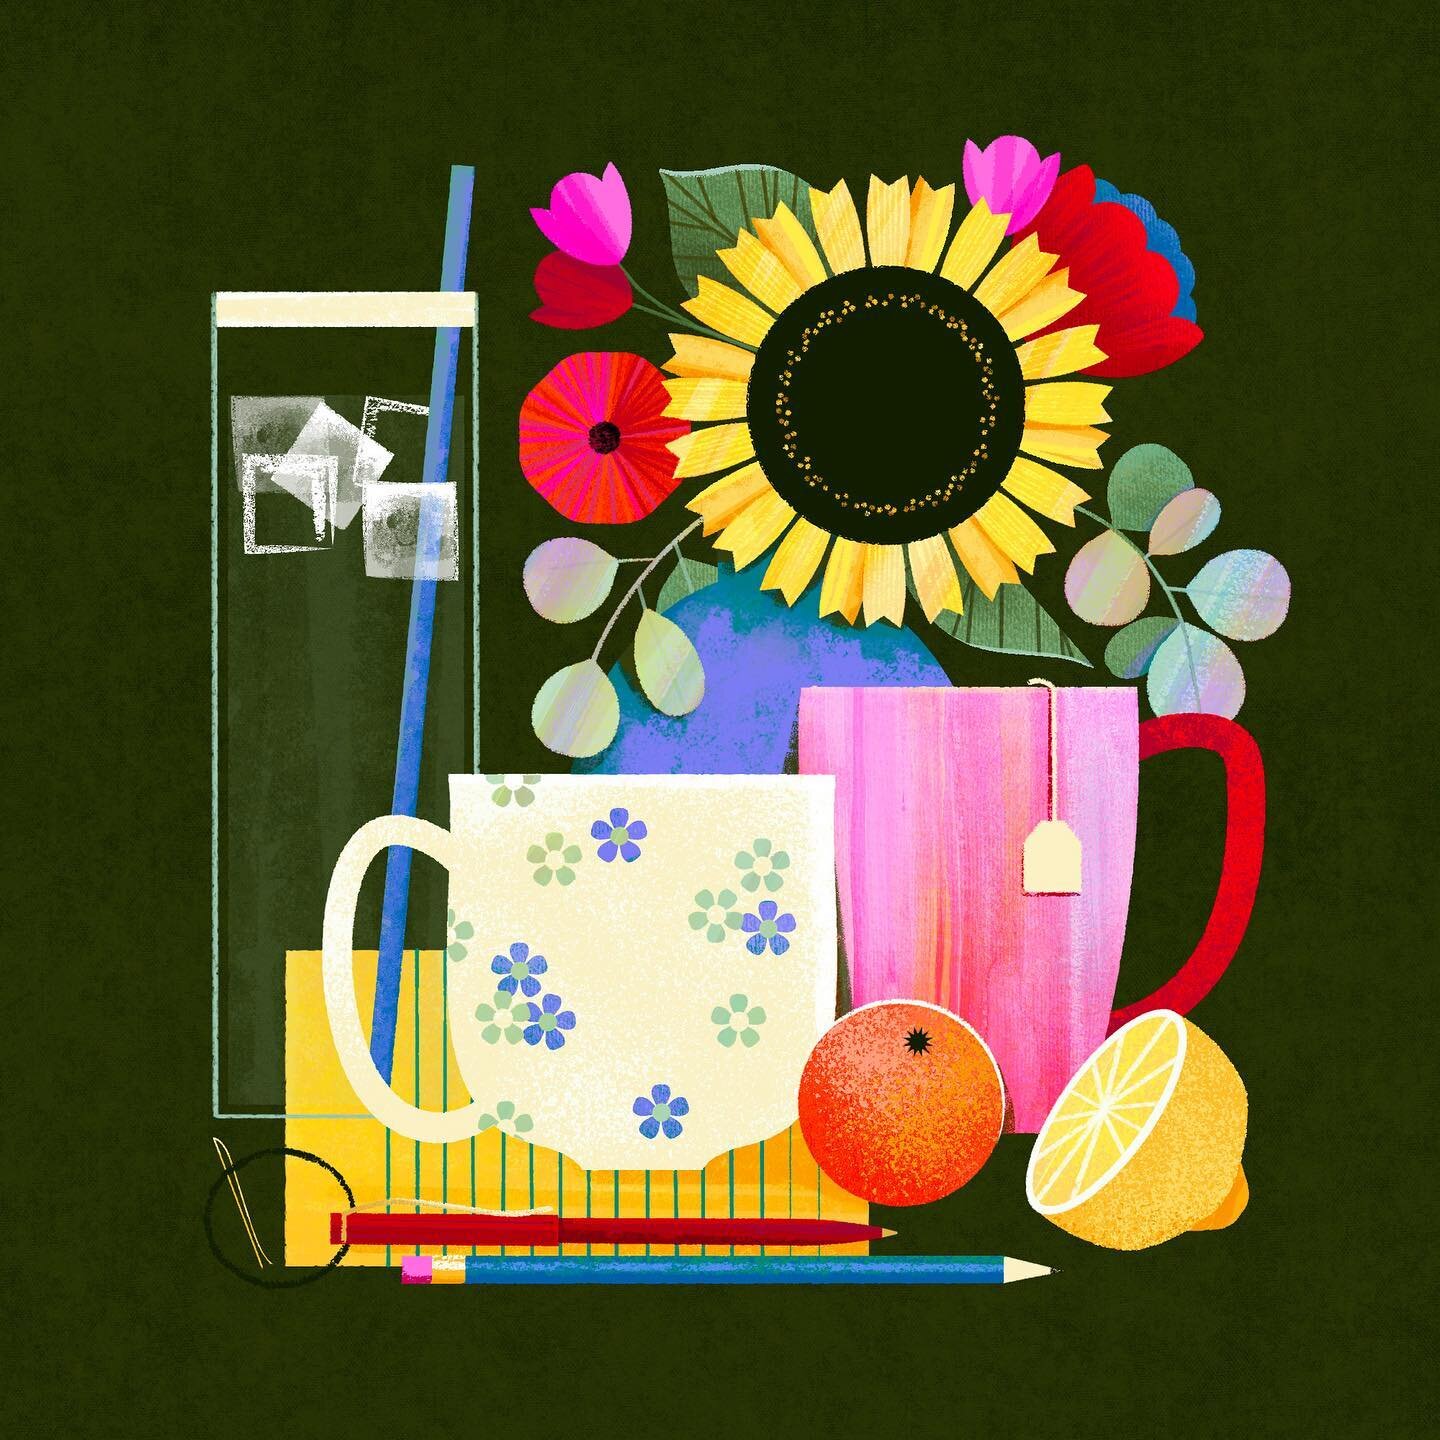 A day late, but a &rsquo;tea time&rsquo; illustration for #Sweetemberdays23. I loved this prompt because for me, tea in September means the kids are back to school and it&rsquo;s just me and my array of beverages at my computer. We had a blast this s